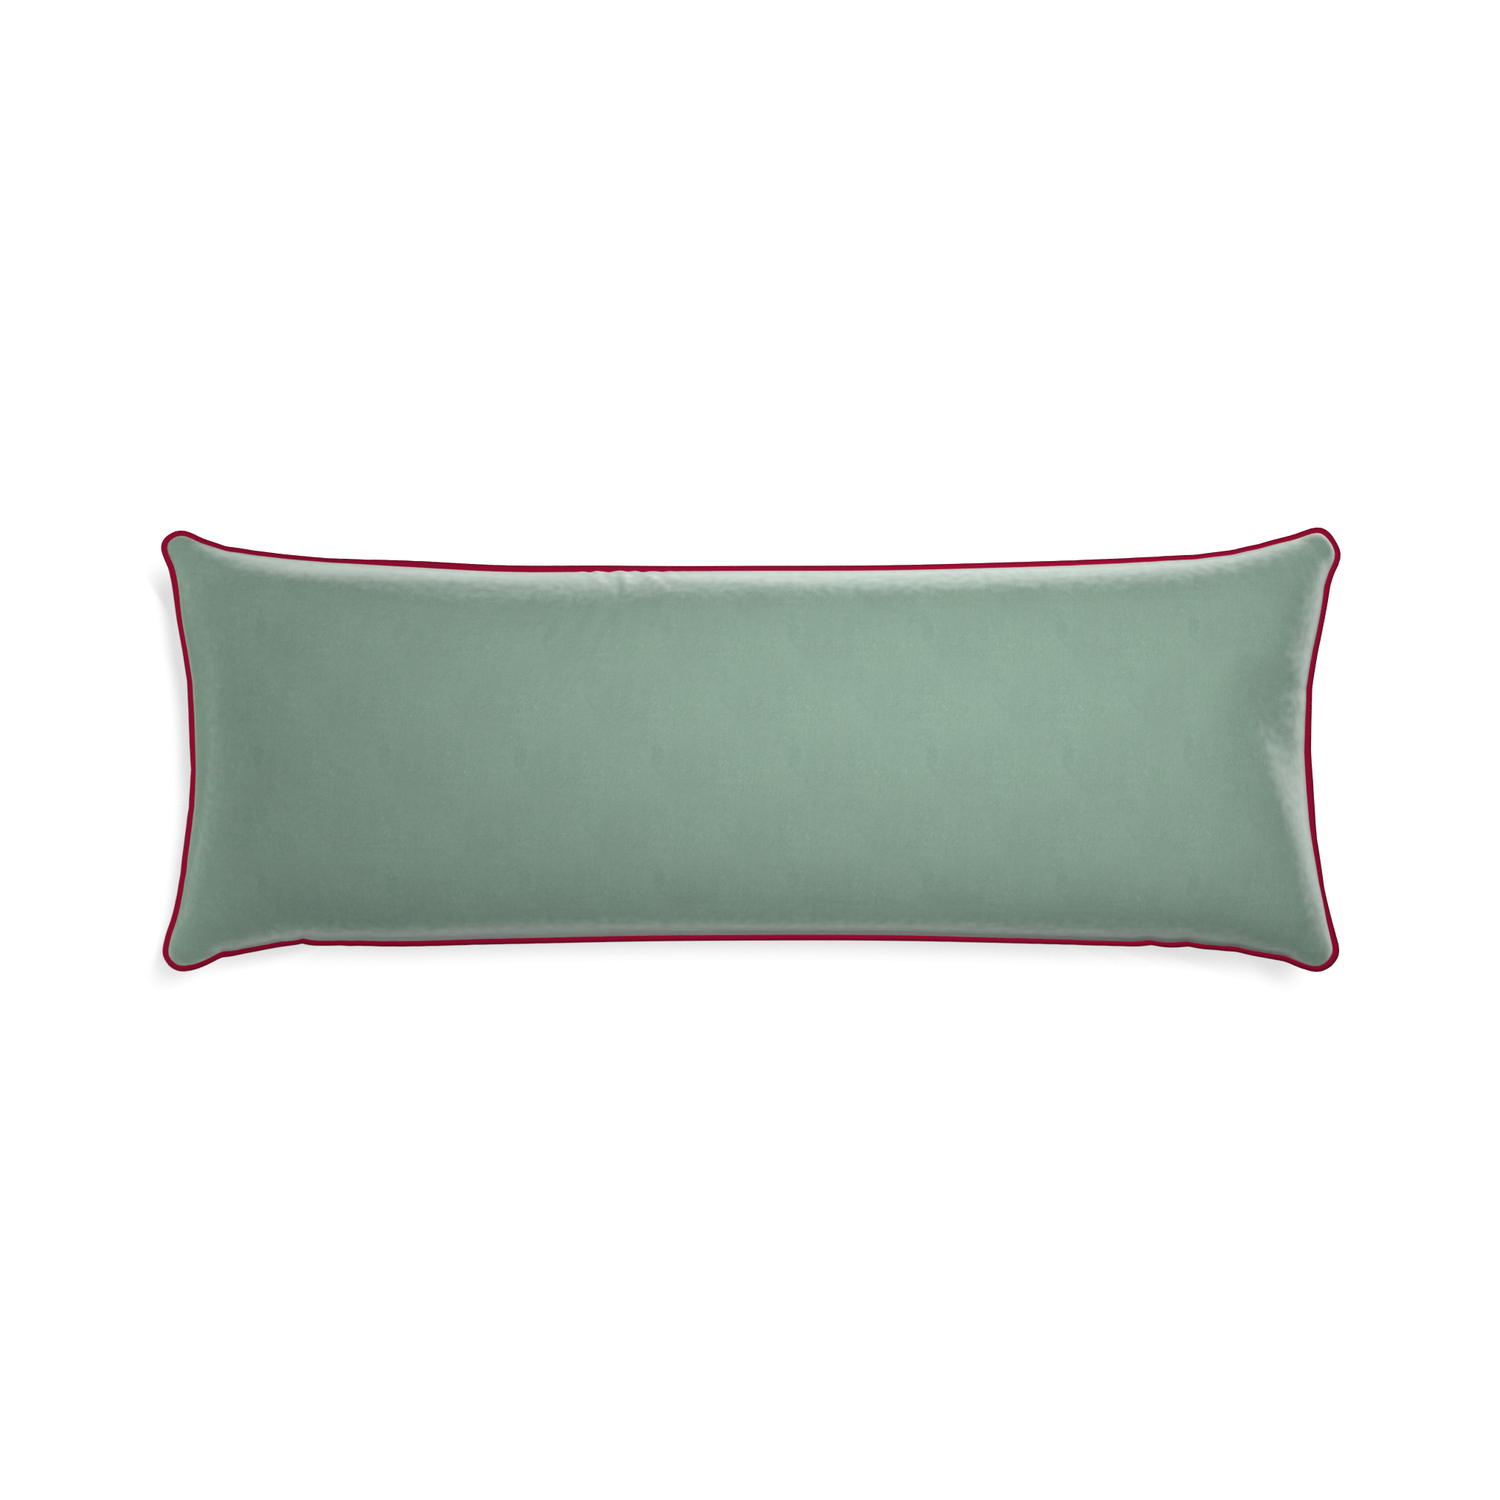 rectangle blue green velvet pillow with dark red piping